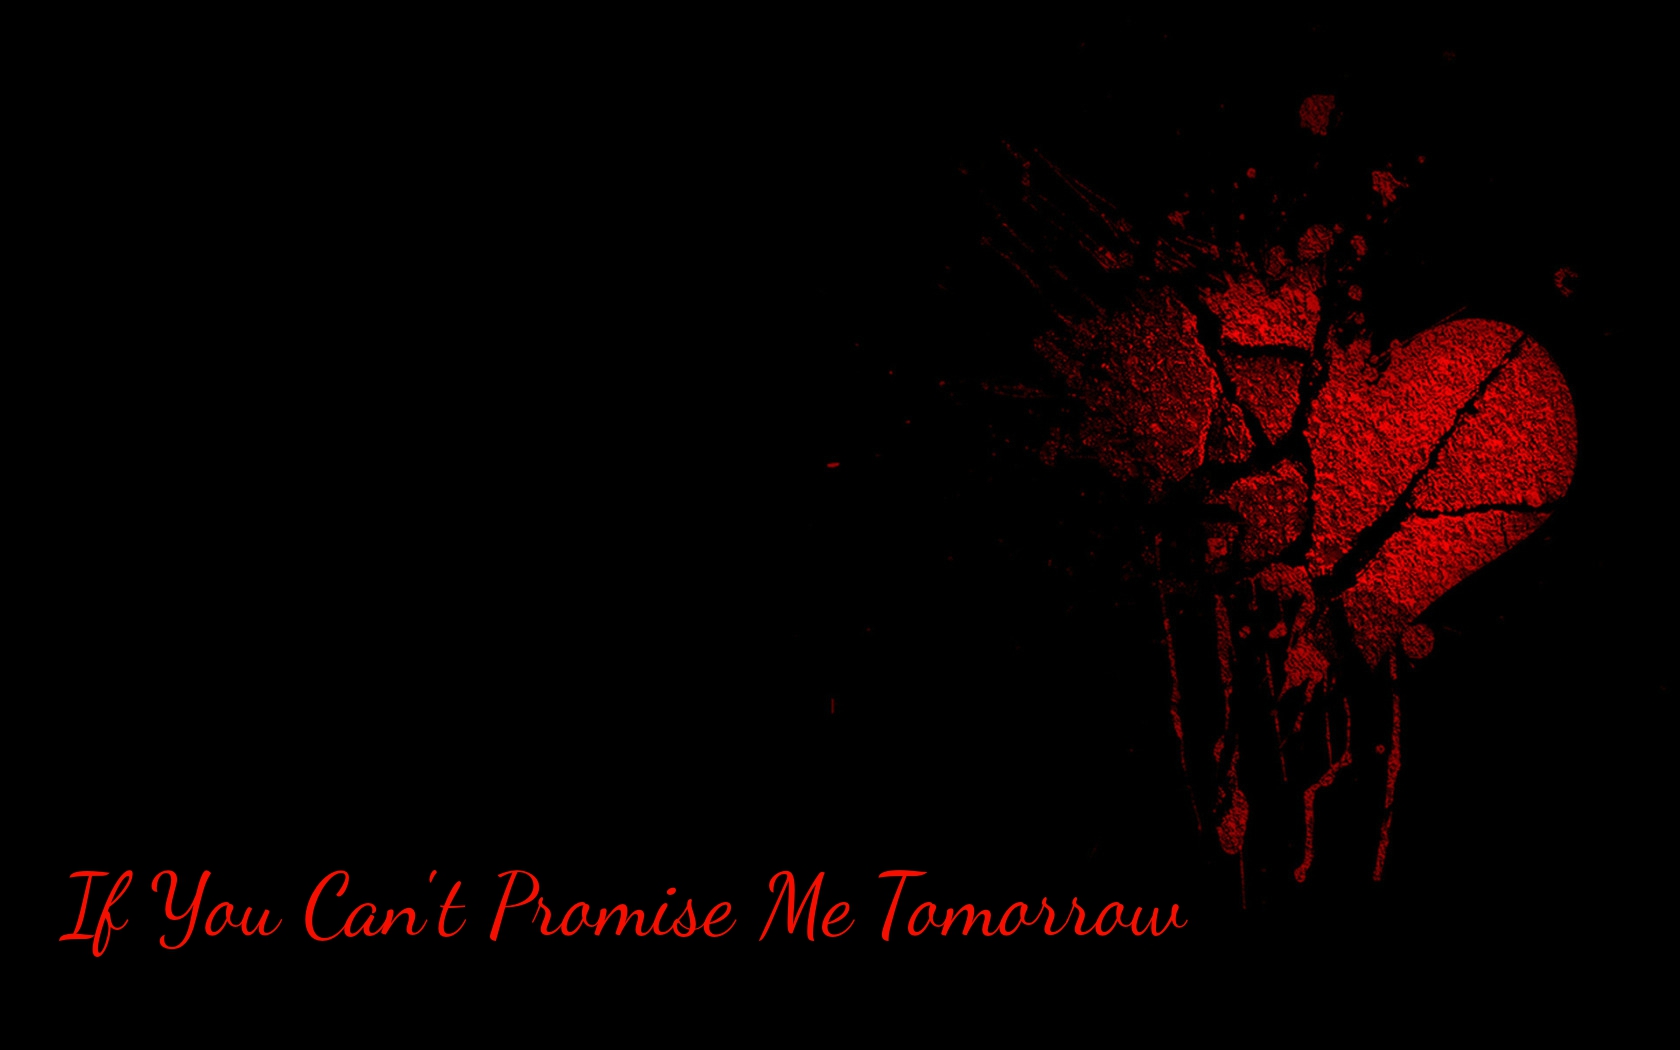 If You Can't Promise Me Tomorrow by Jason Beil